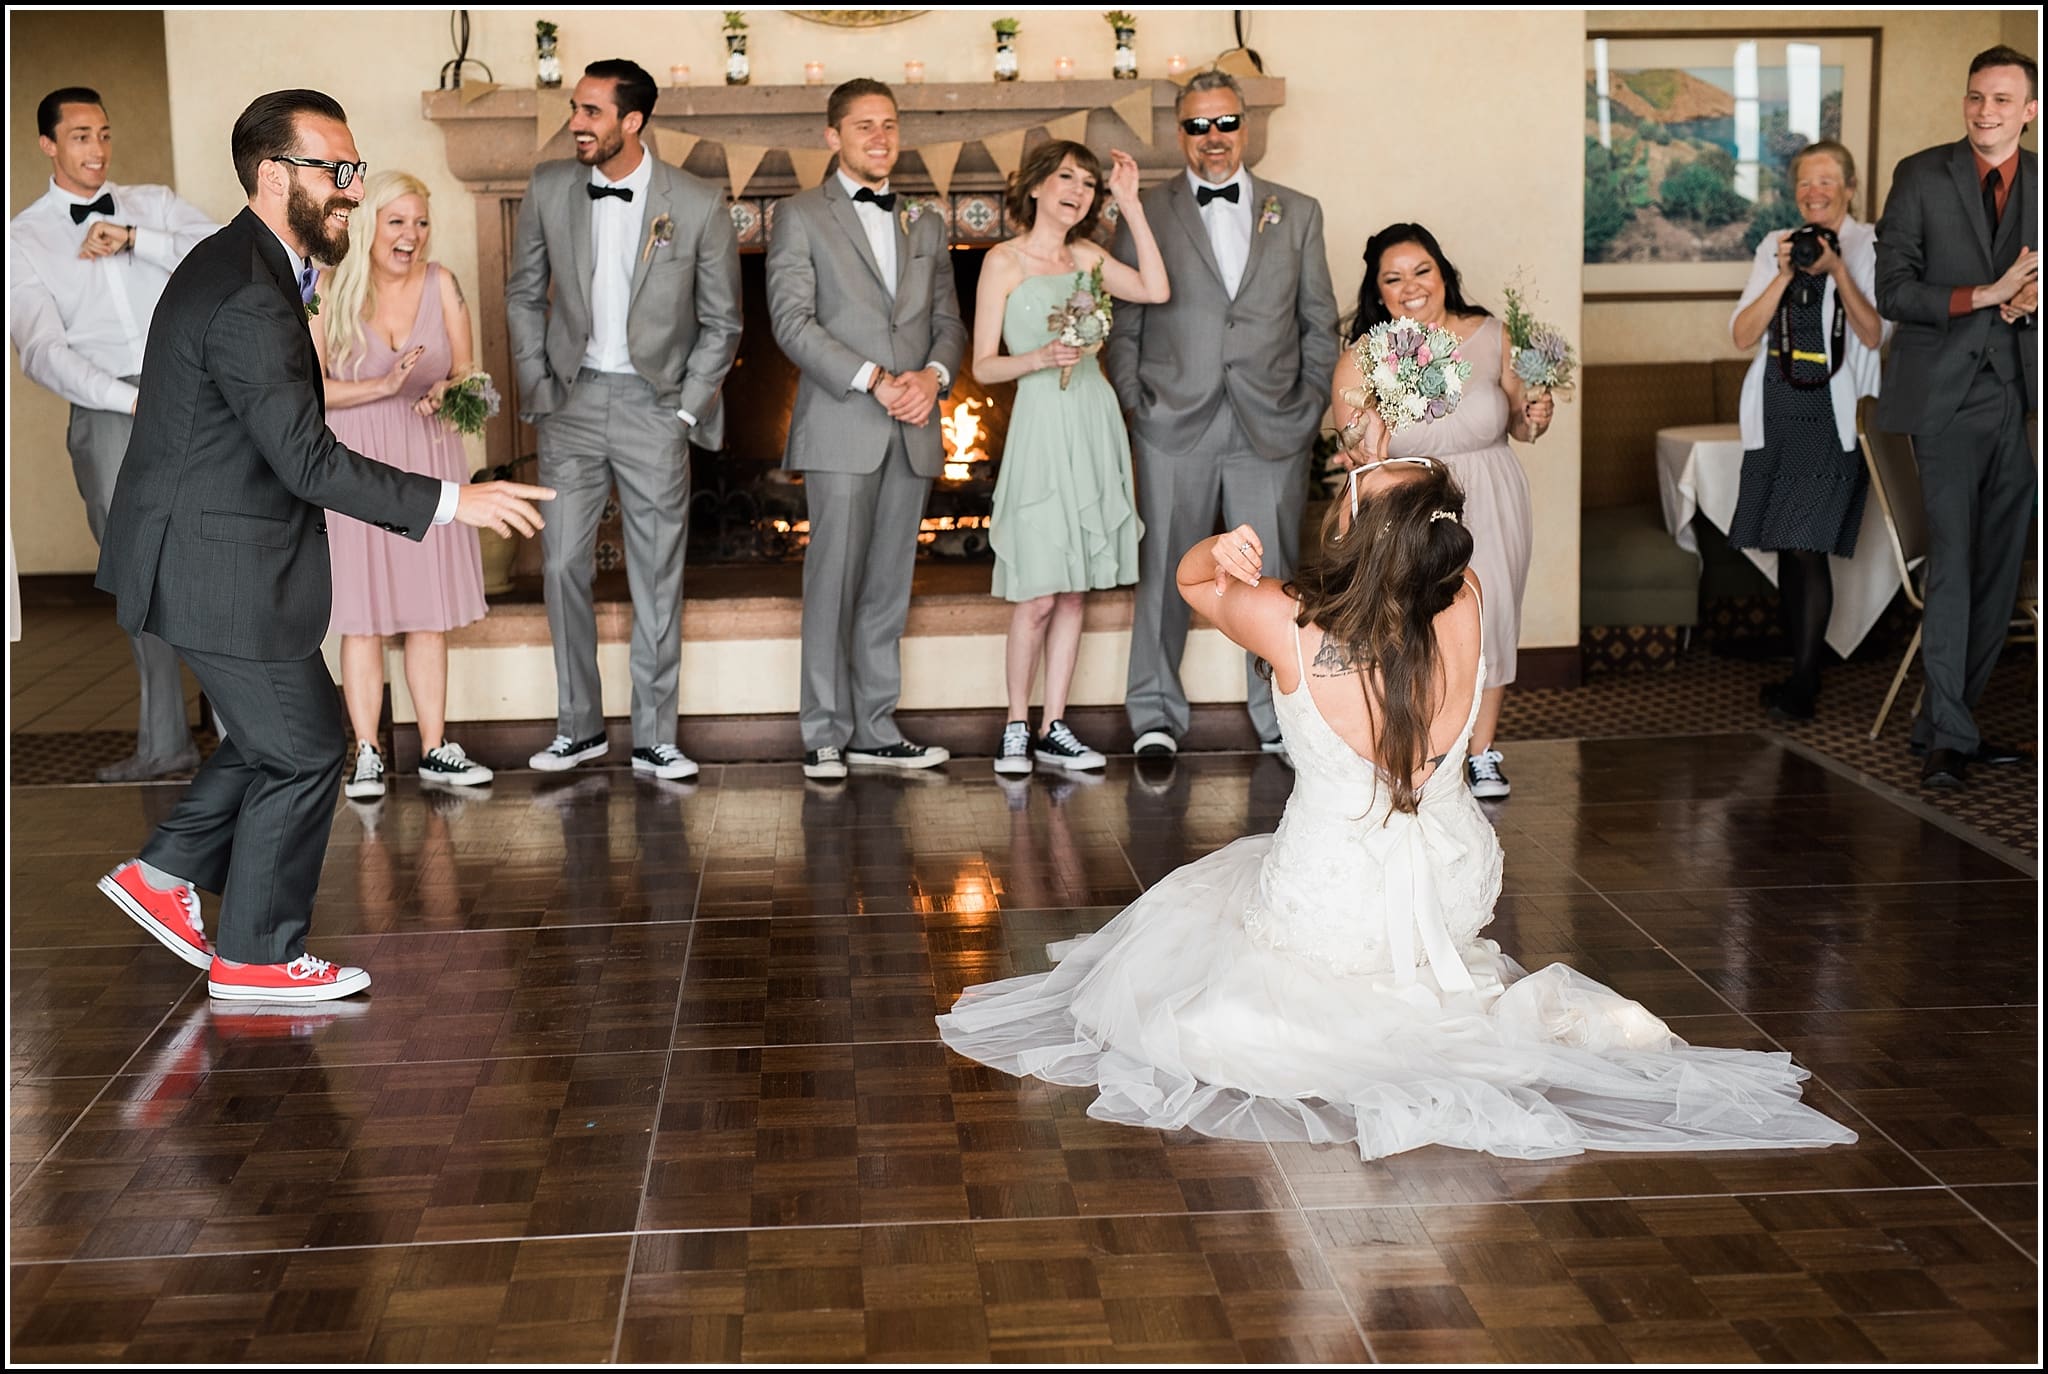  favorite wedding images 2016, wedding photos from 2016, our favorite wedding photos, wedding reception fails, grand entrance fails